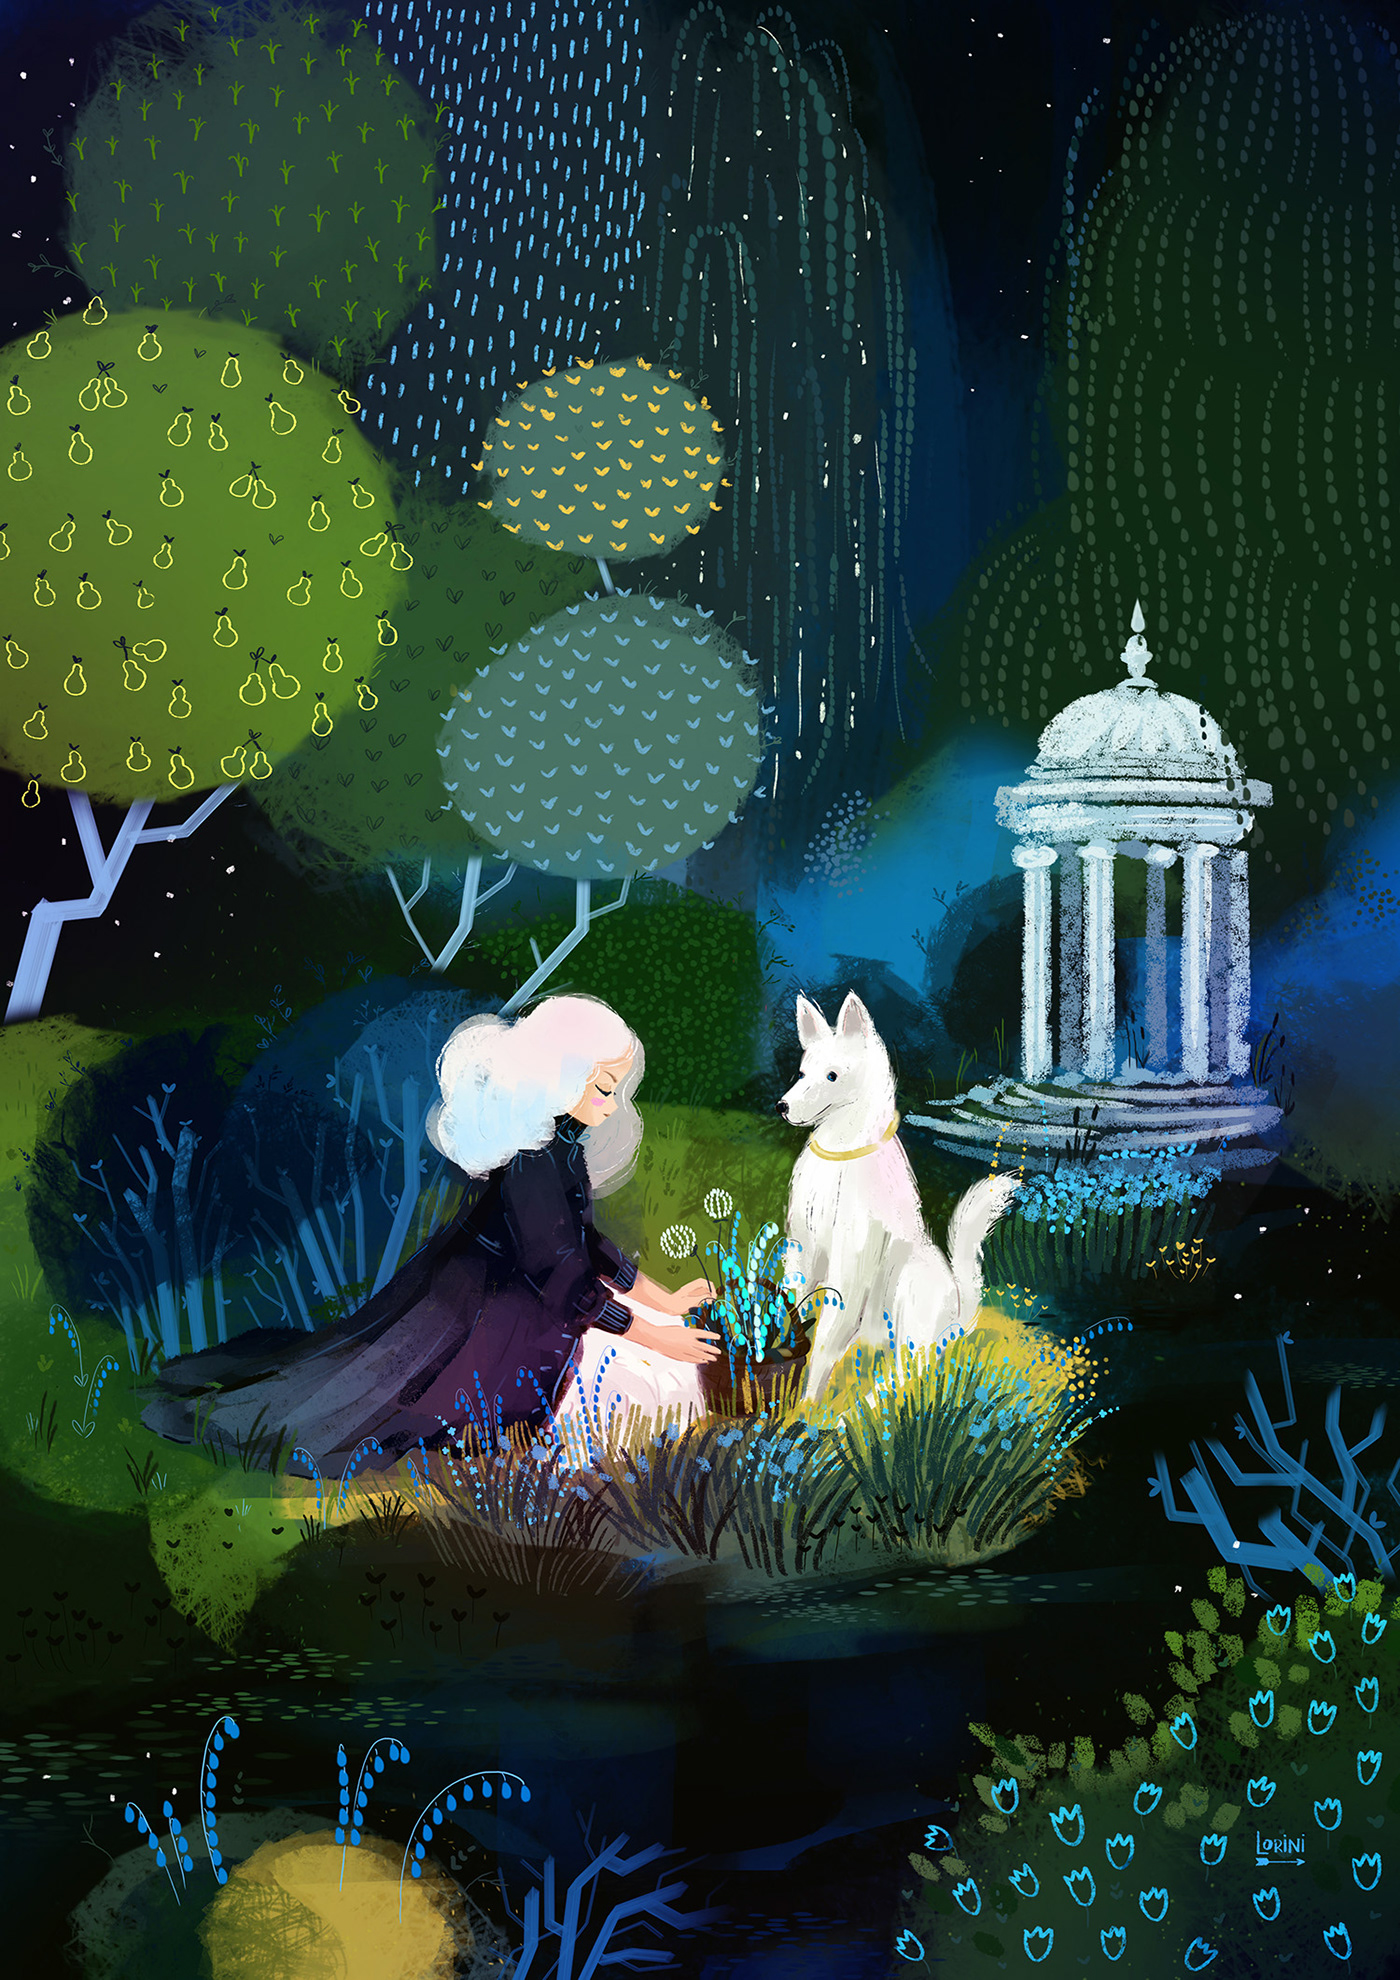 lovely lady with white hair in a dark cape. She sits on the grass with her dog in the night garden